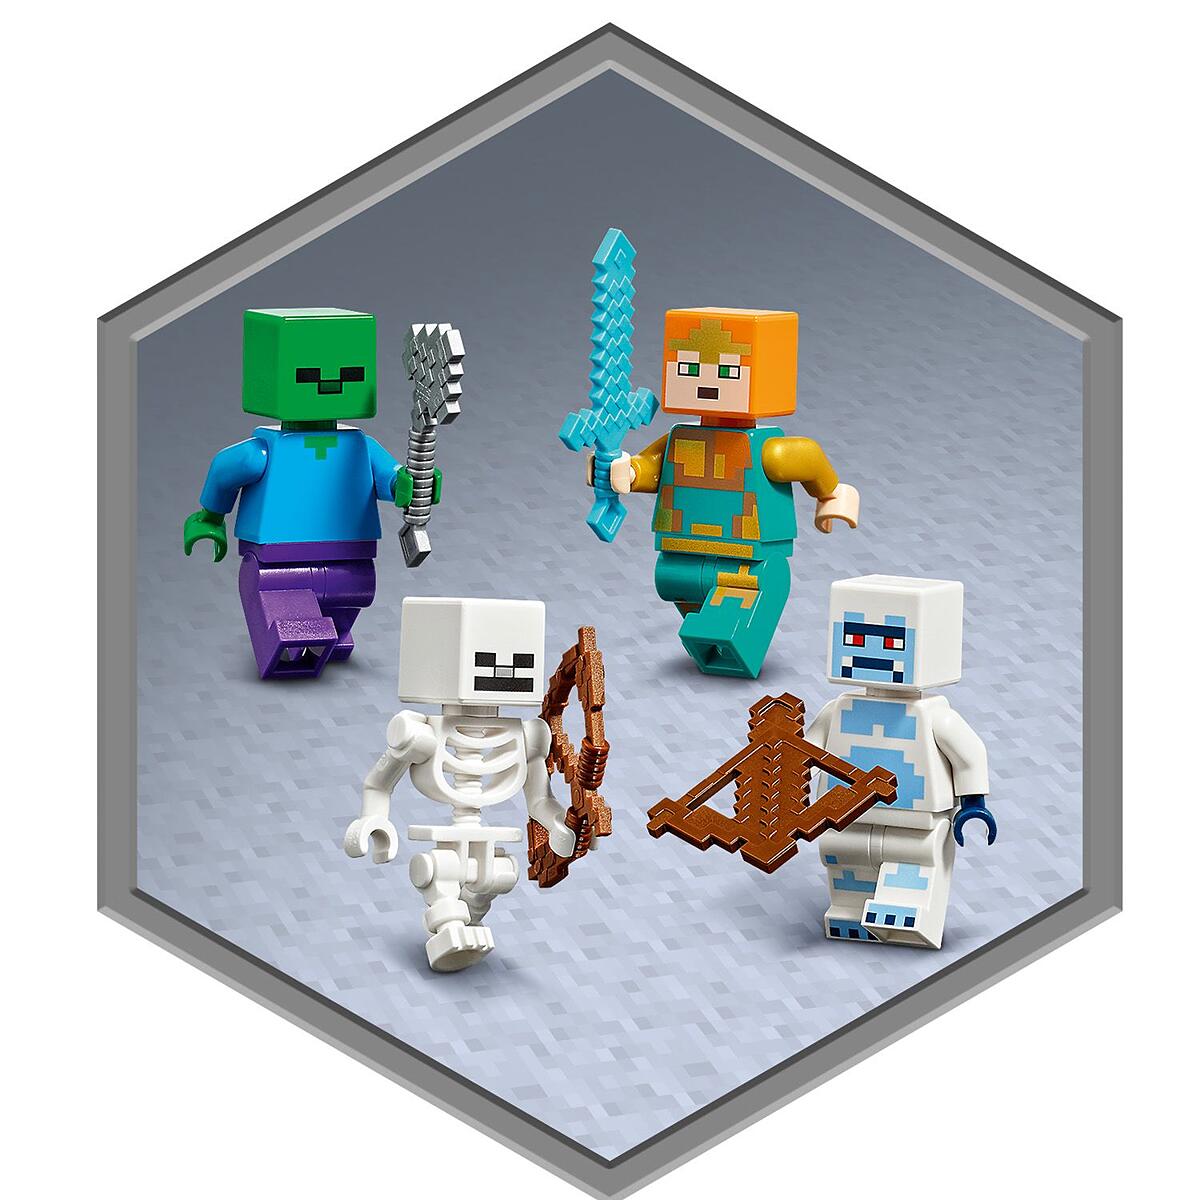 Familiar Minecraft® characters